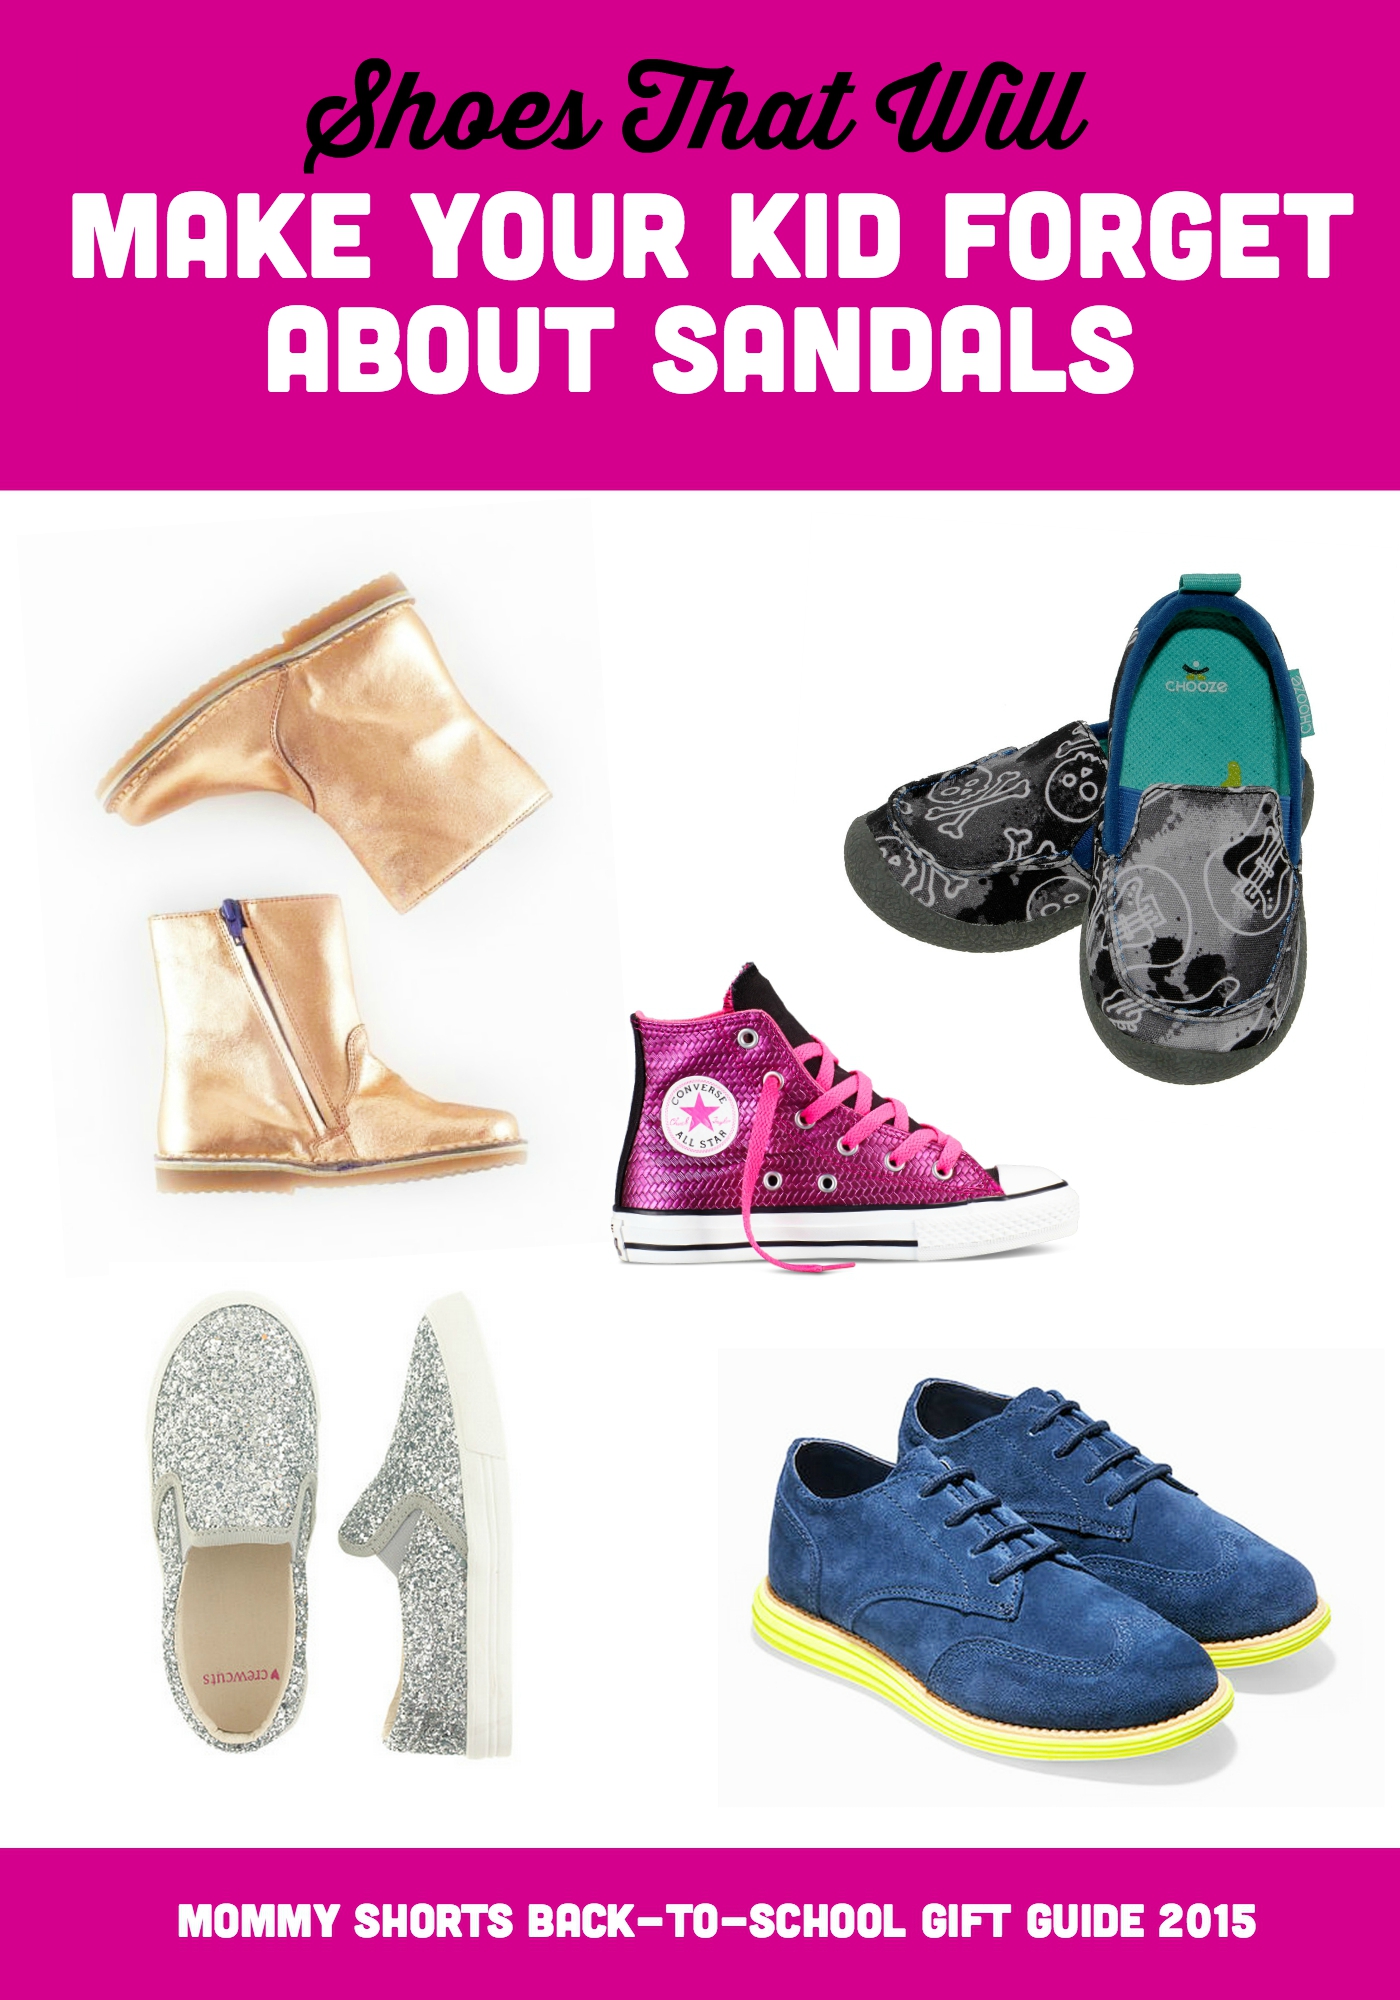 Shoes That Will Make Your Kid Forget About Sandals